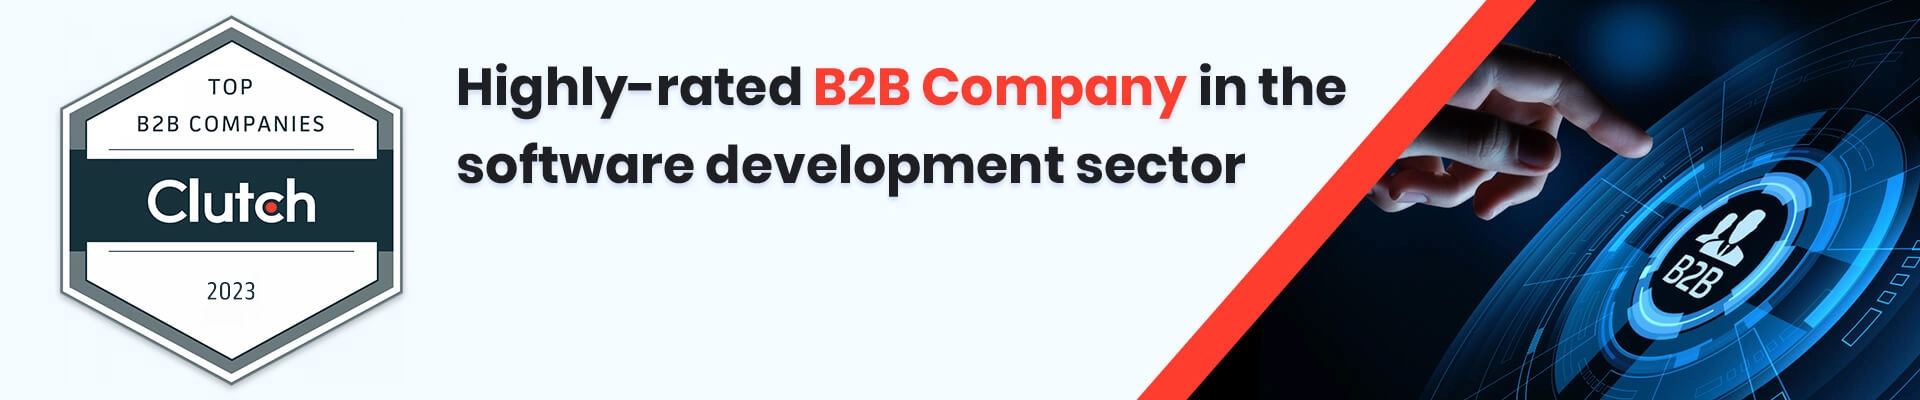 Highly-rated B2B company in the software development sector